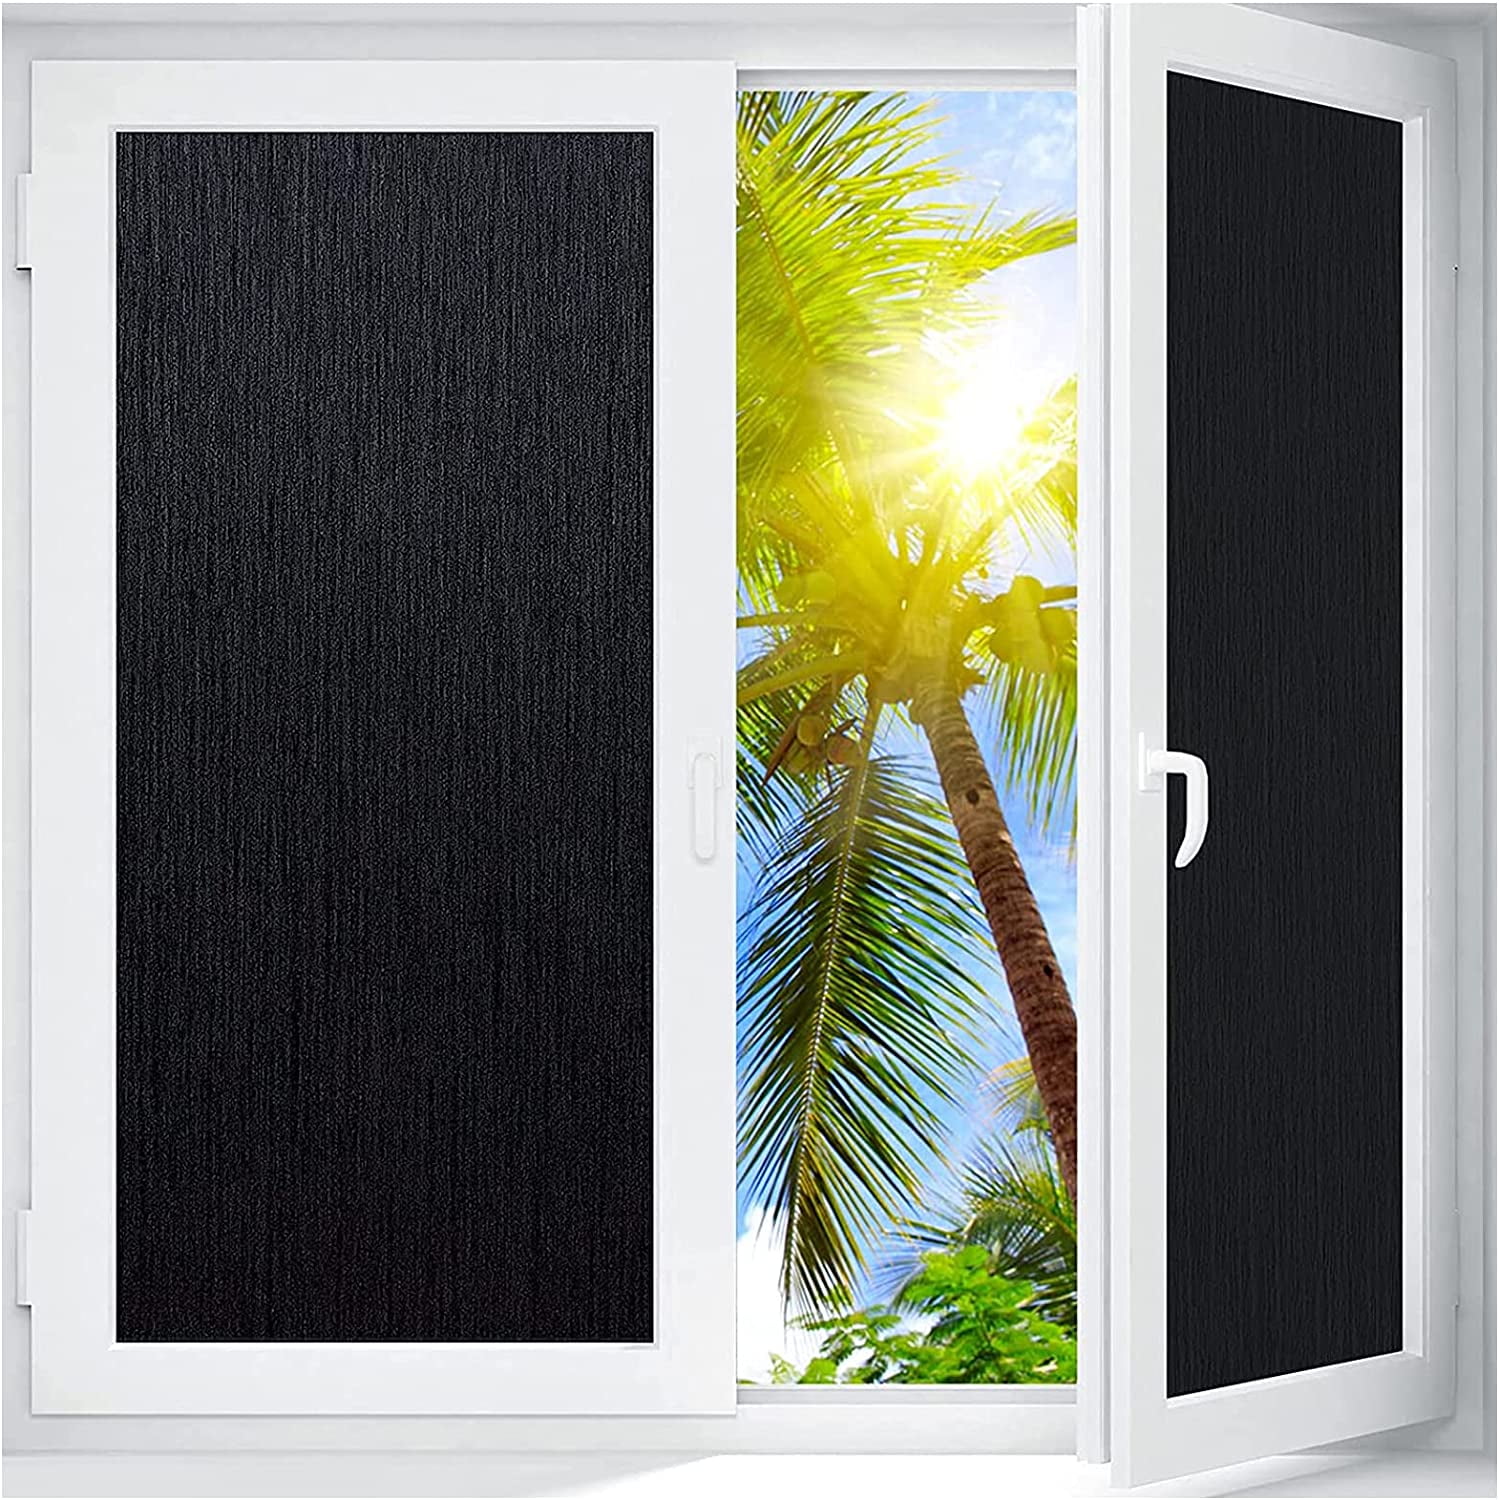 60" X 50 FT ROLL BLACKOUT FILM PRIVACY FOR OFFICE,BATH,GLASS DOORS,STOREFRONTS 